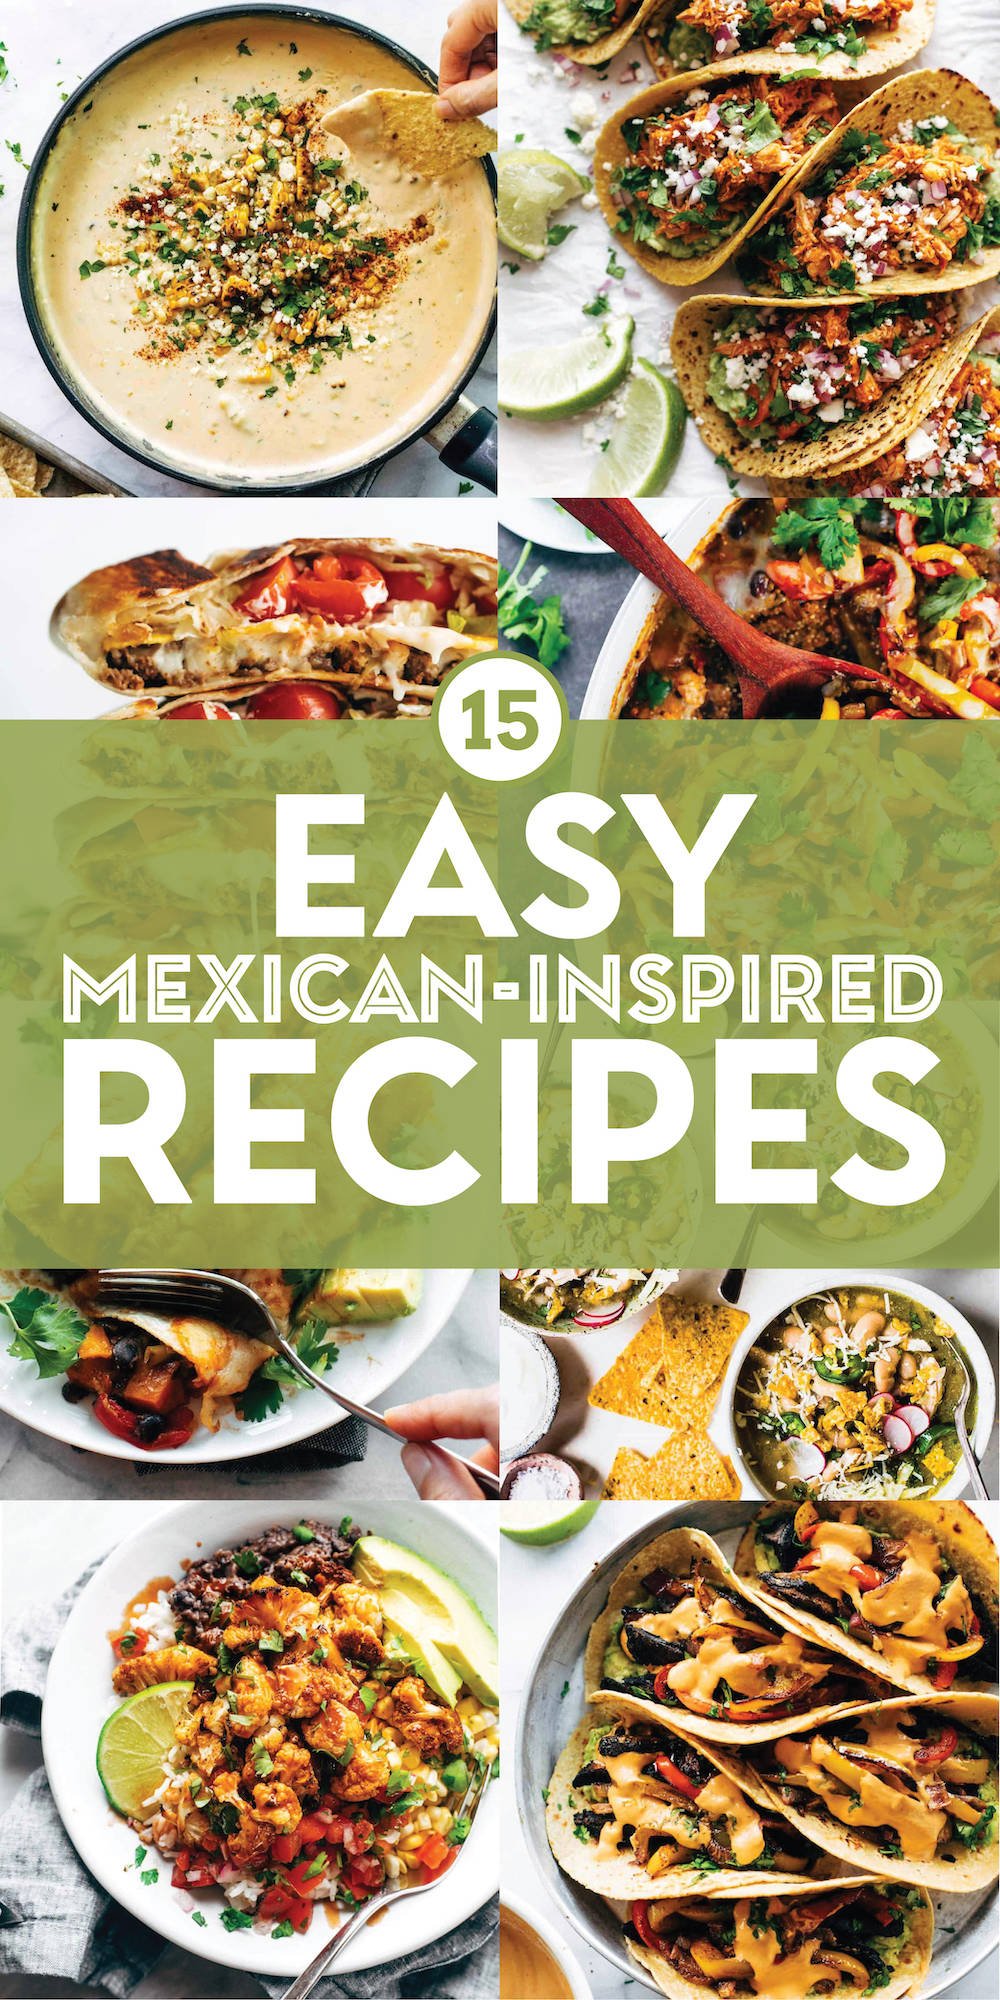 15 Easy Mexican-Inspired Recipes - Pinch of Yum